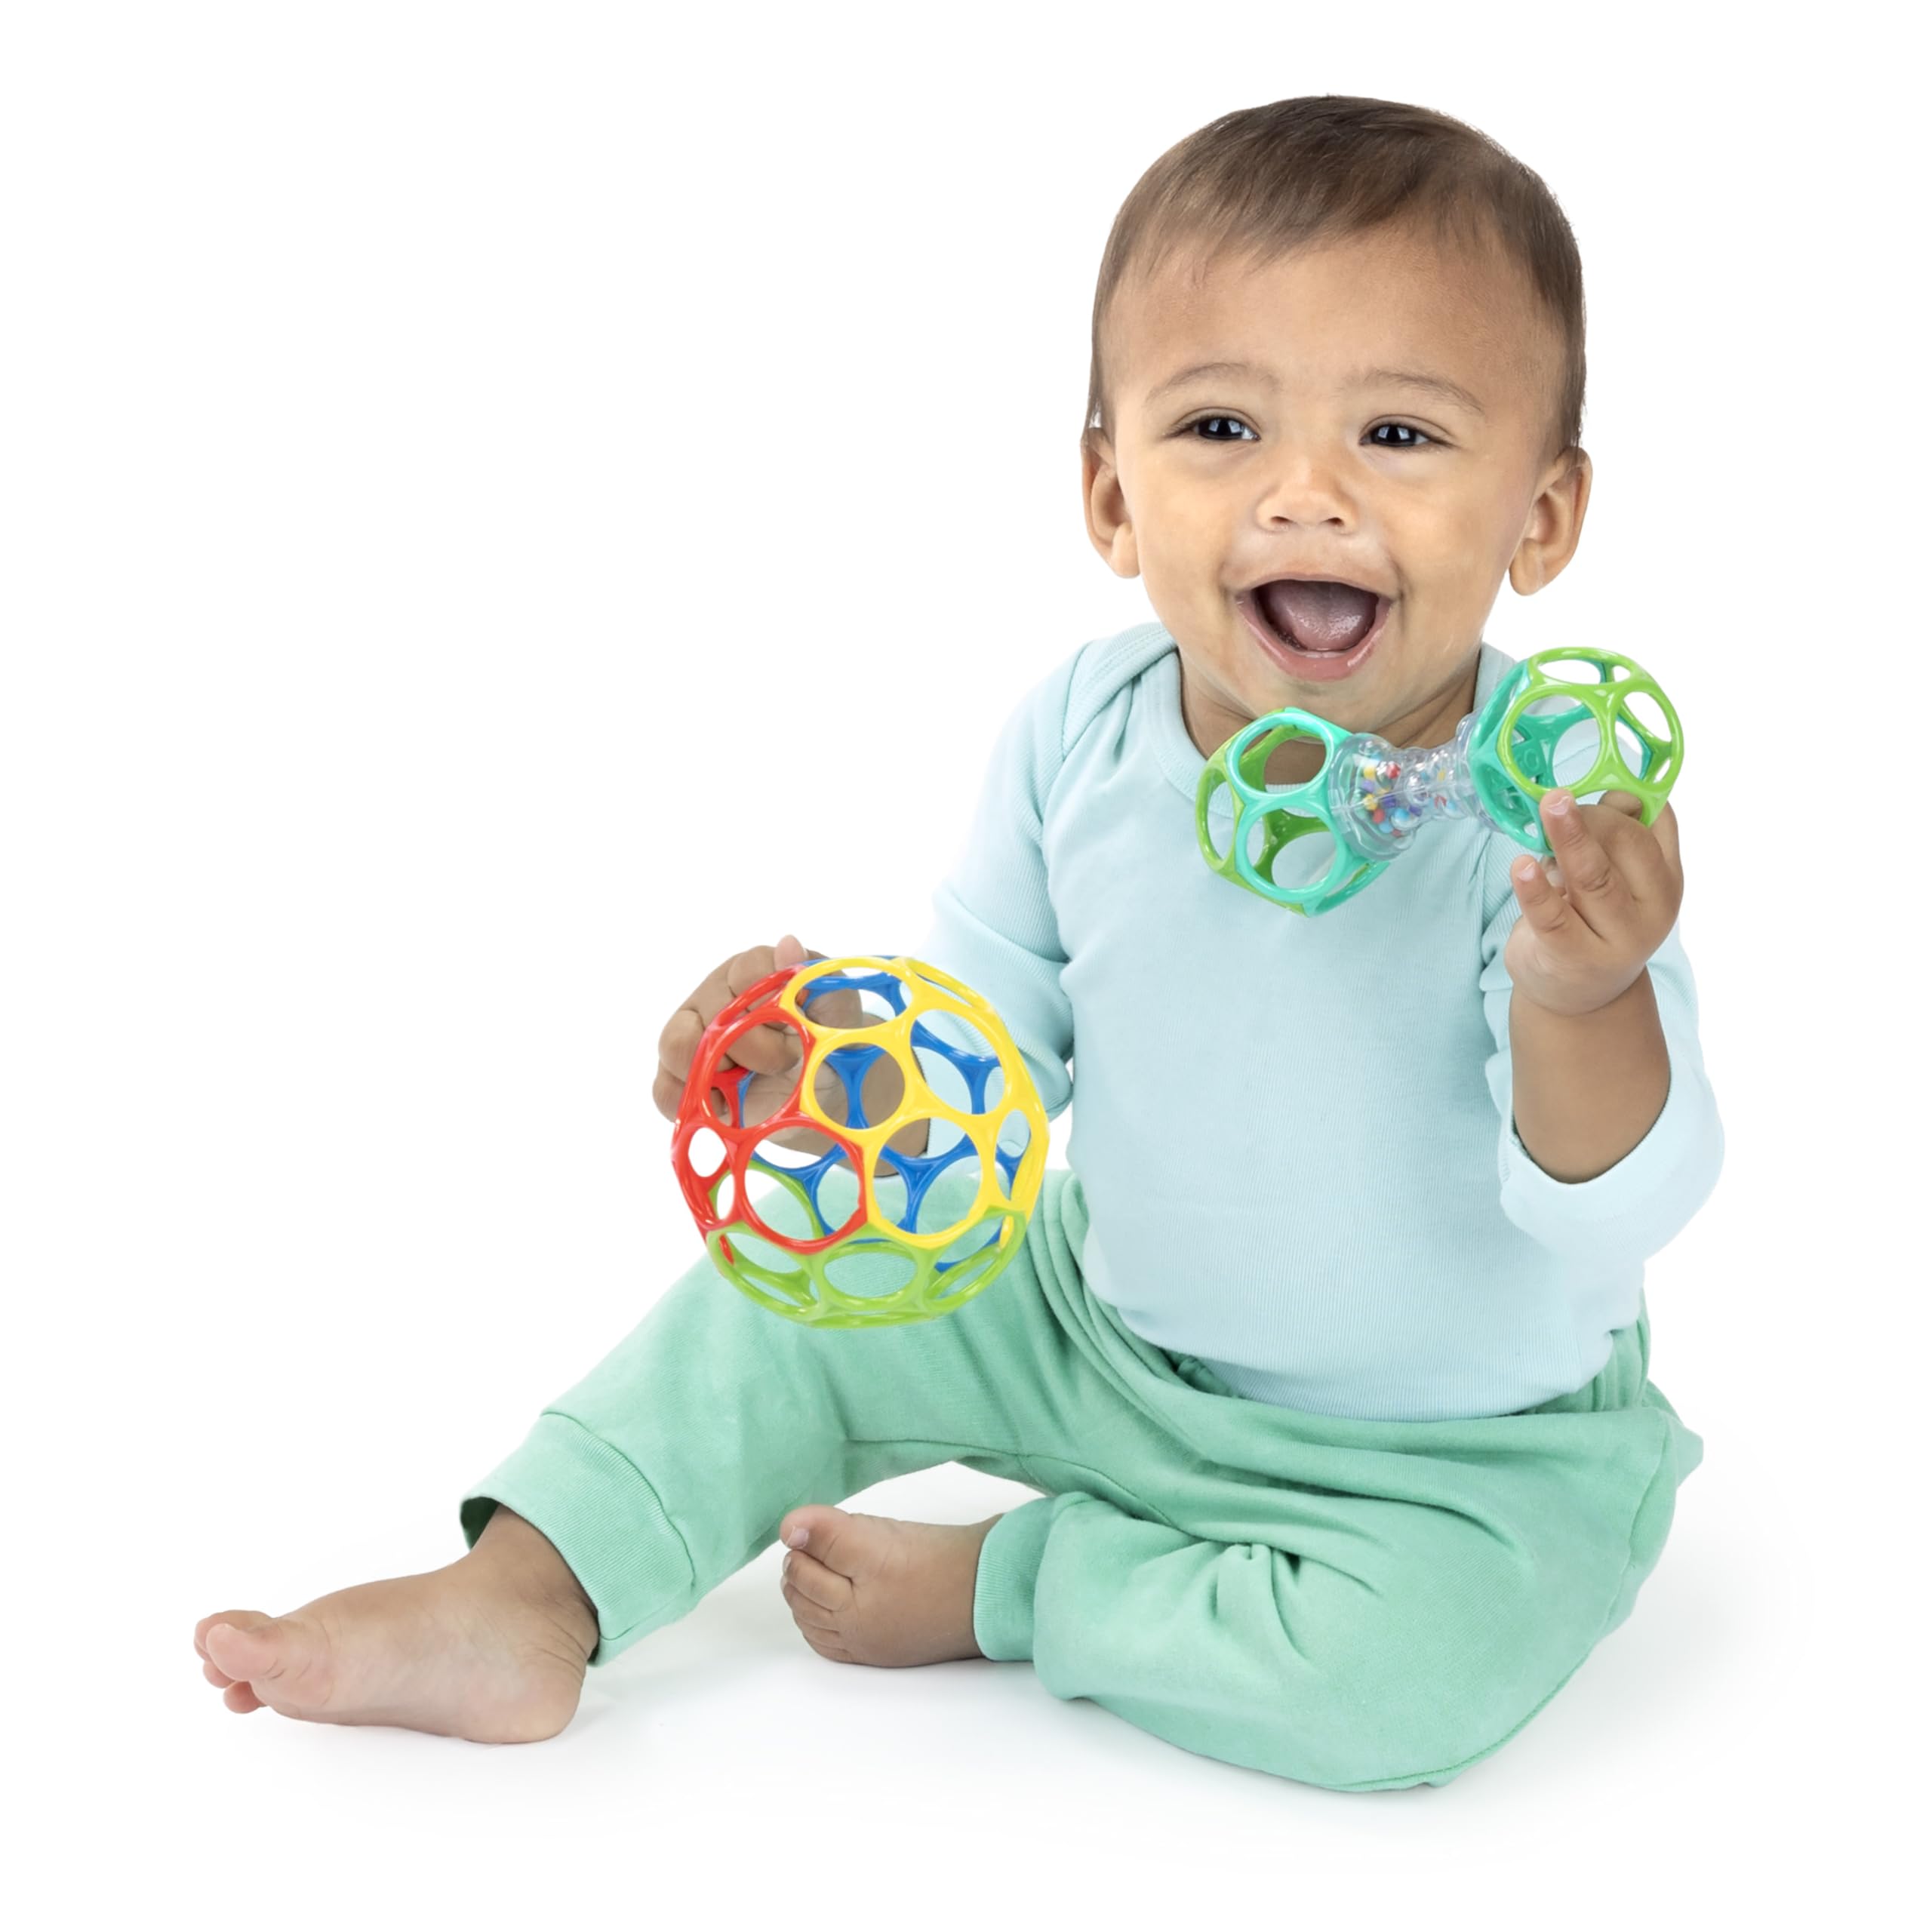 Bright Starts Easy-Grasp Oball Bundle Gift Set - Grasp The Day, Ball and Rattle Toys 2-Pack, BPA Free, Unisex, Newborn+